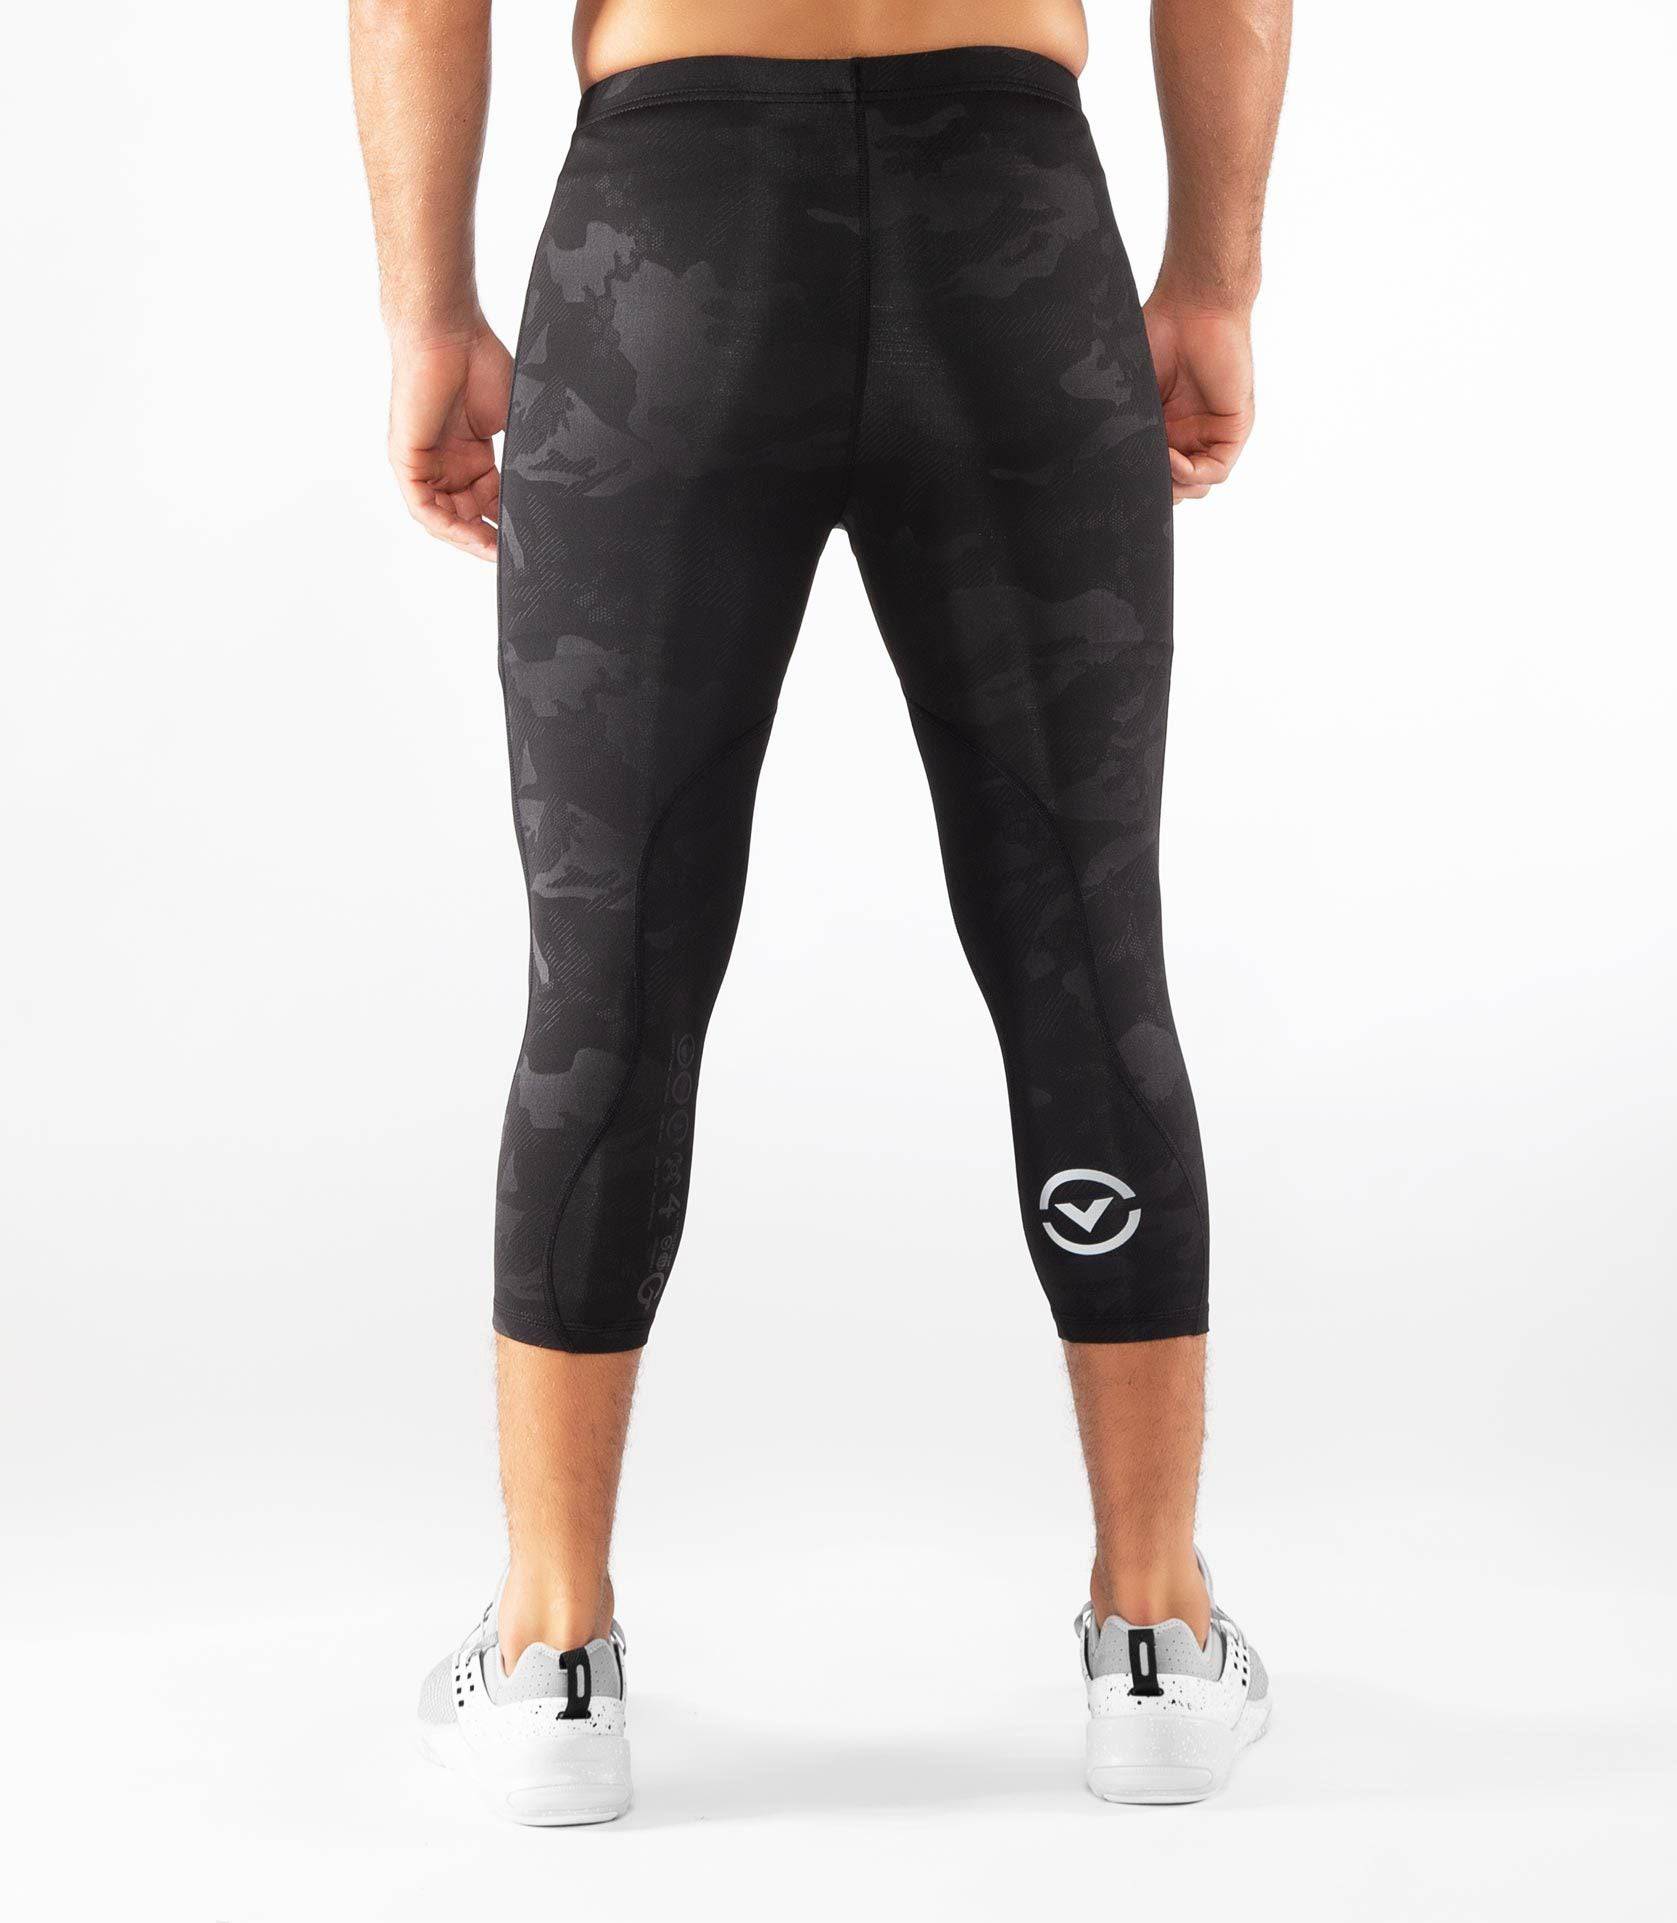 Virus | SIO17 Stay Warm Compression 3/4 Boot Cut - XTC Fitness - Exercise Equipment Superstore - Canada - Pant - Boot Cut